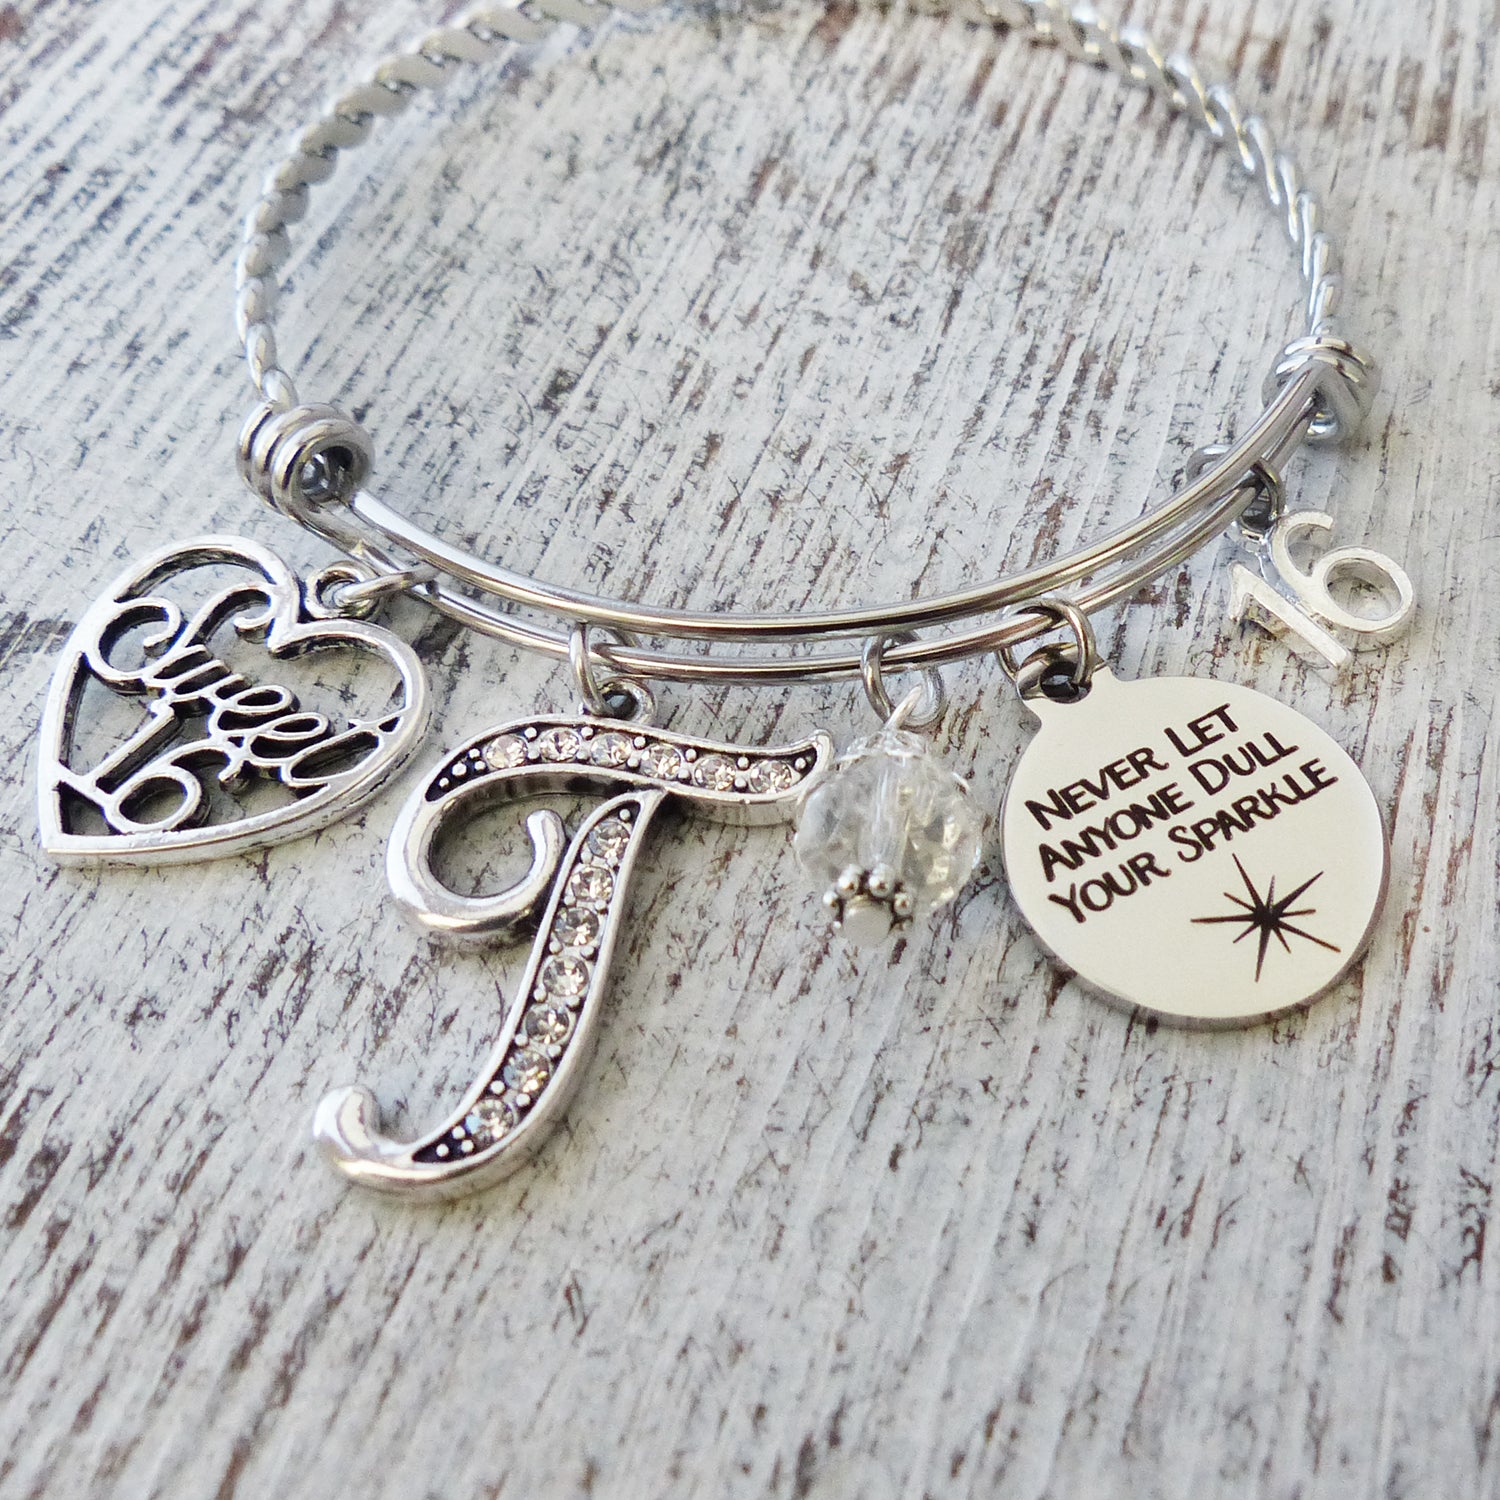 Personalized SWEET 16 Jewelry, 16th Birthday Gift, Never let anyone dull your sparkle-Bangle Bracelet, 16th Birthday Gifts